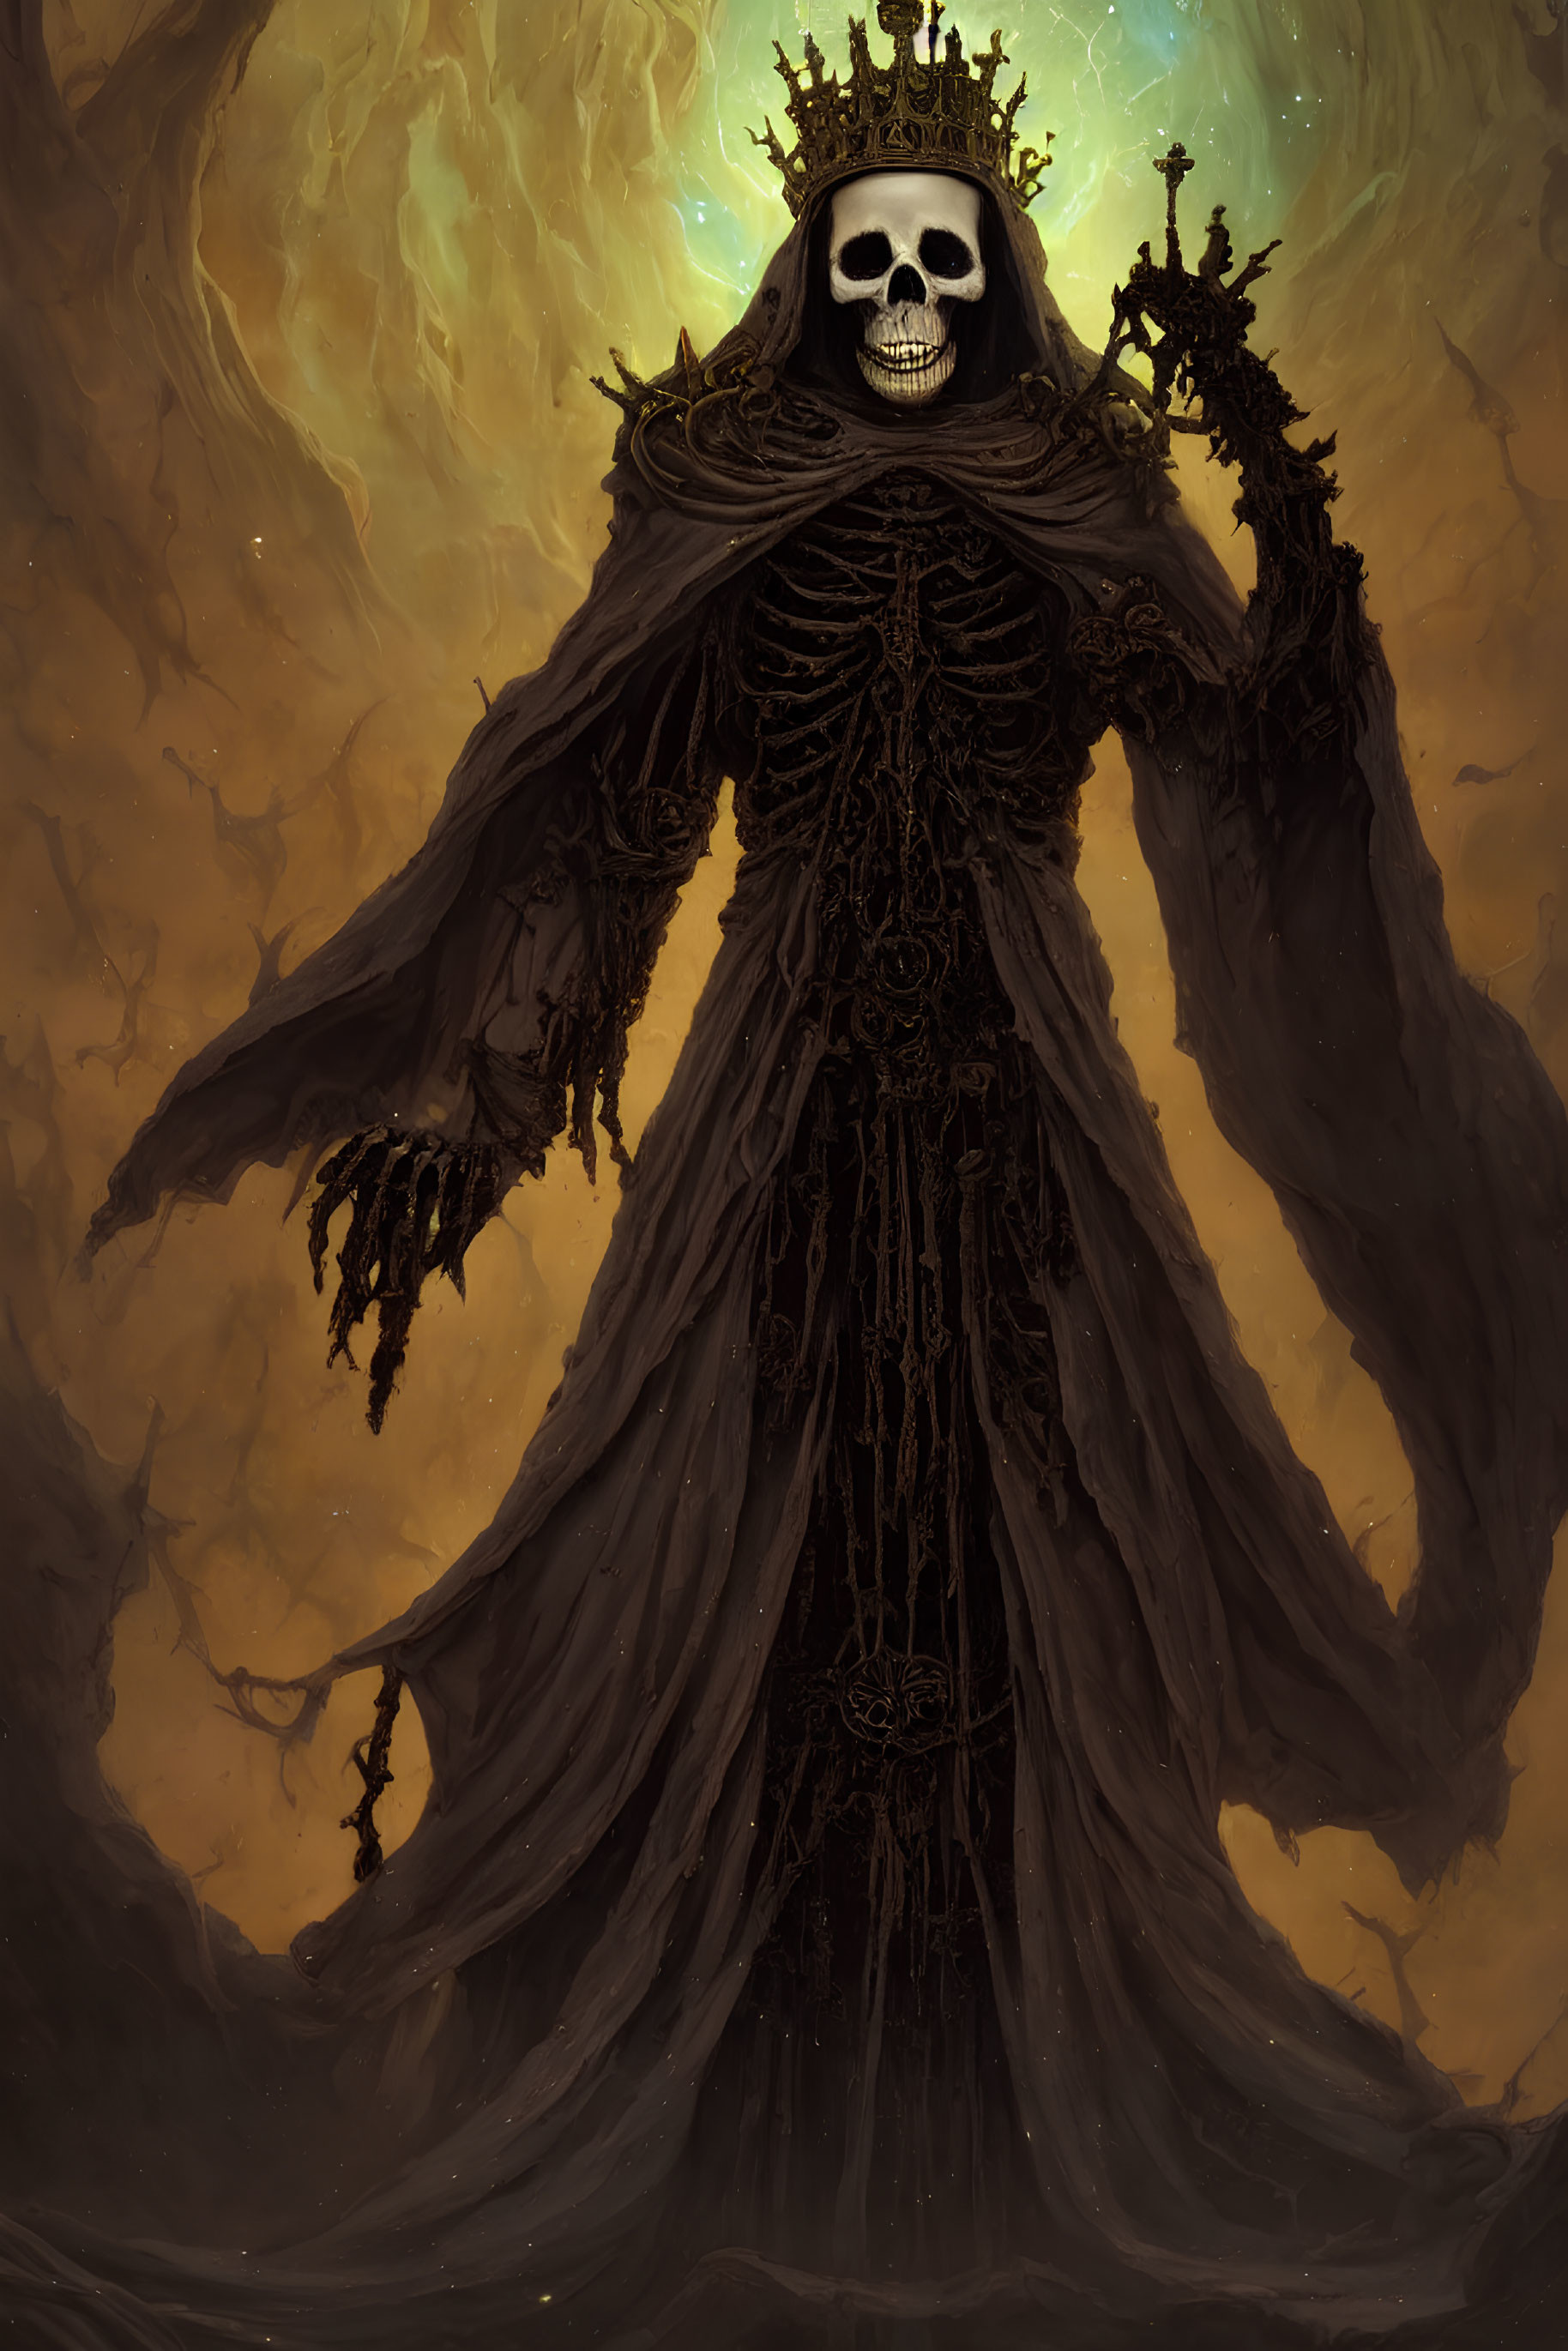 Skeletal Figure in Ornate Robes and Crown with Flames Background